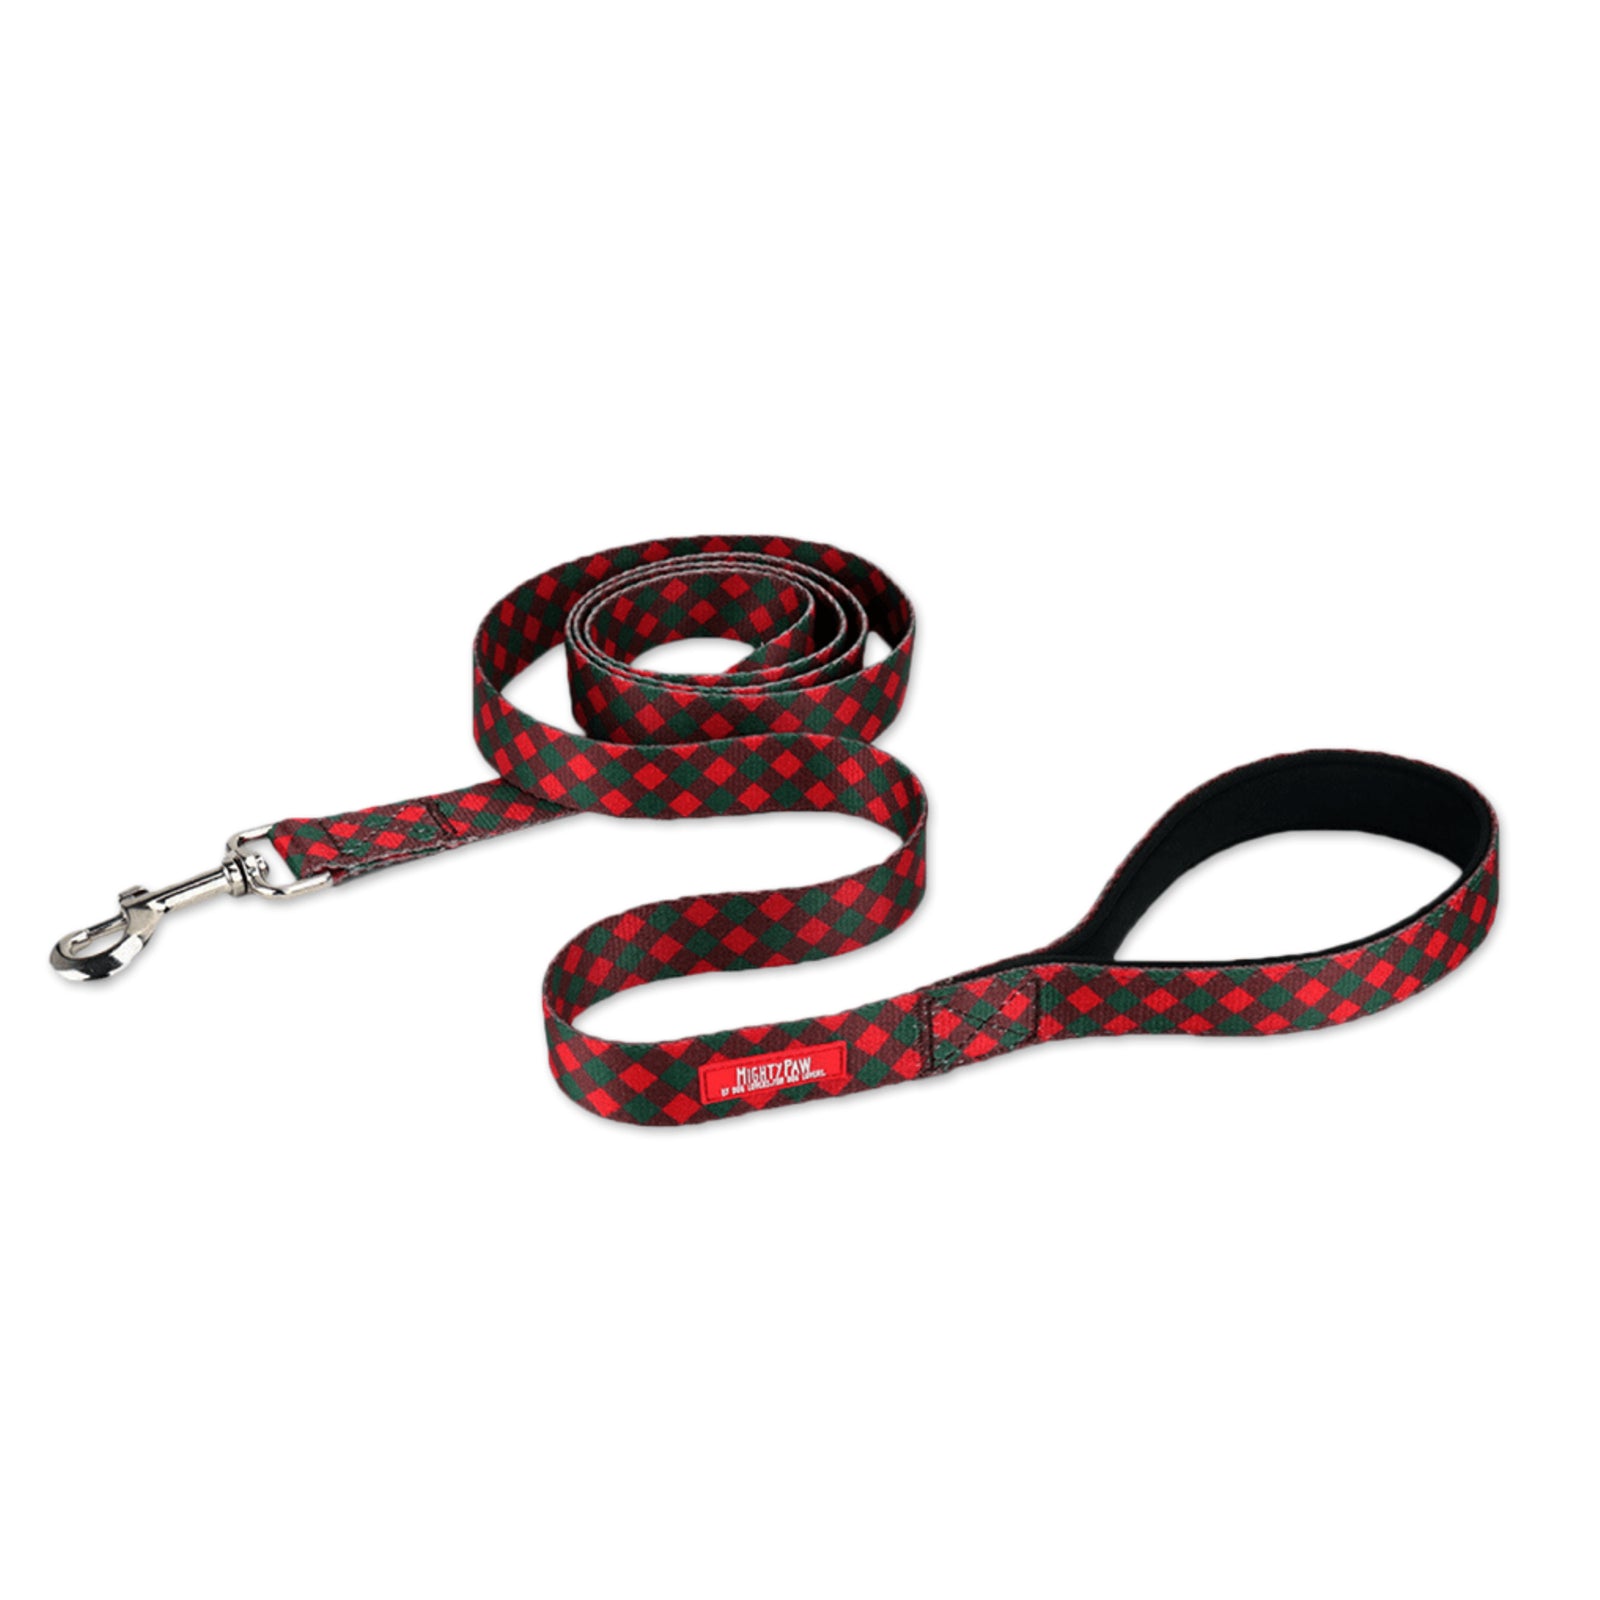 Christmas Dog Leash with Festive Red & Green Plaid Pattern